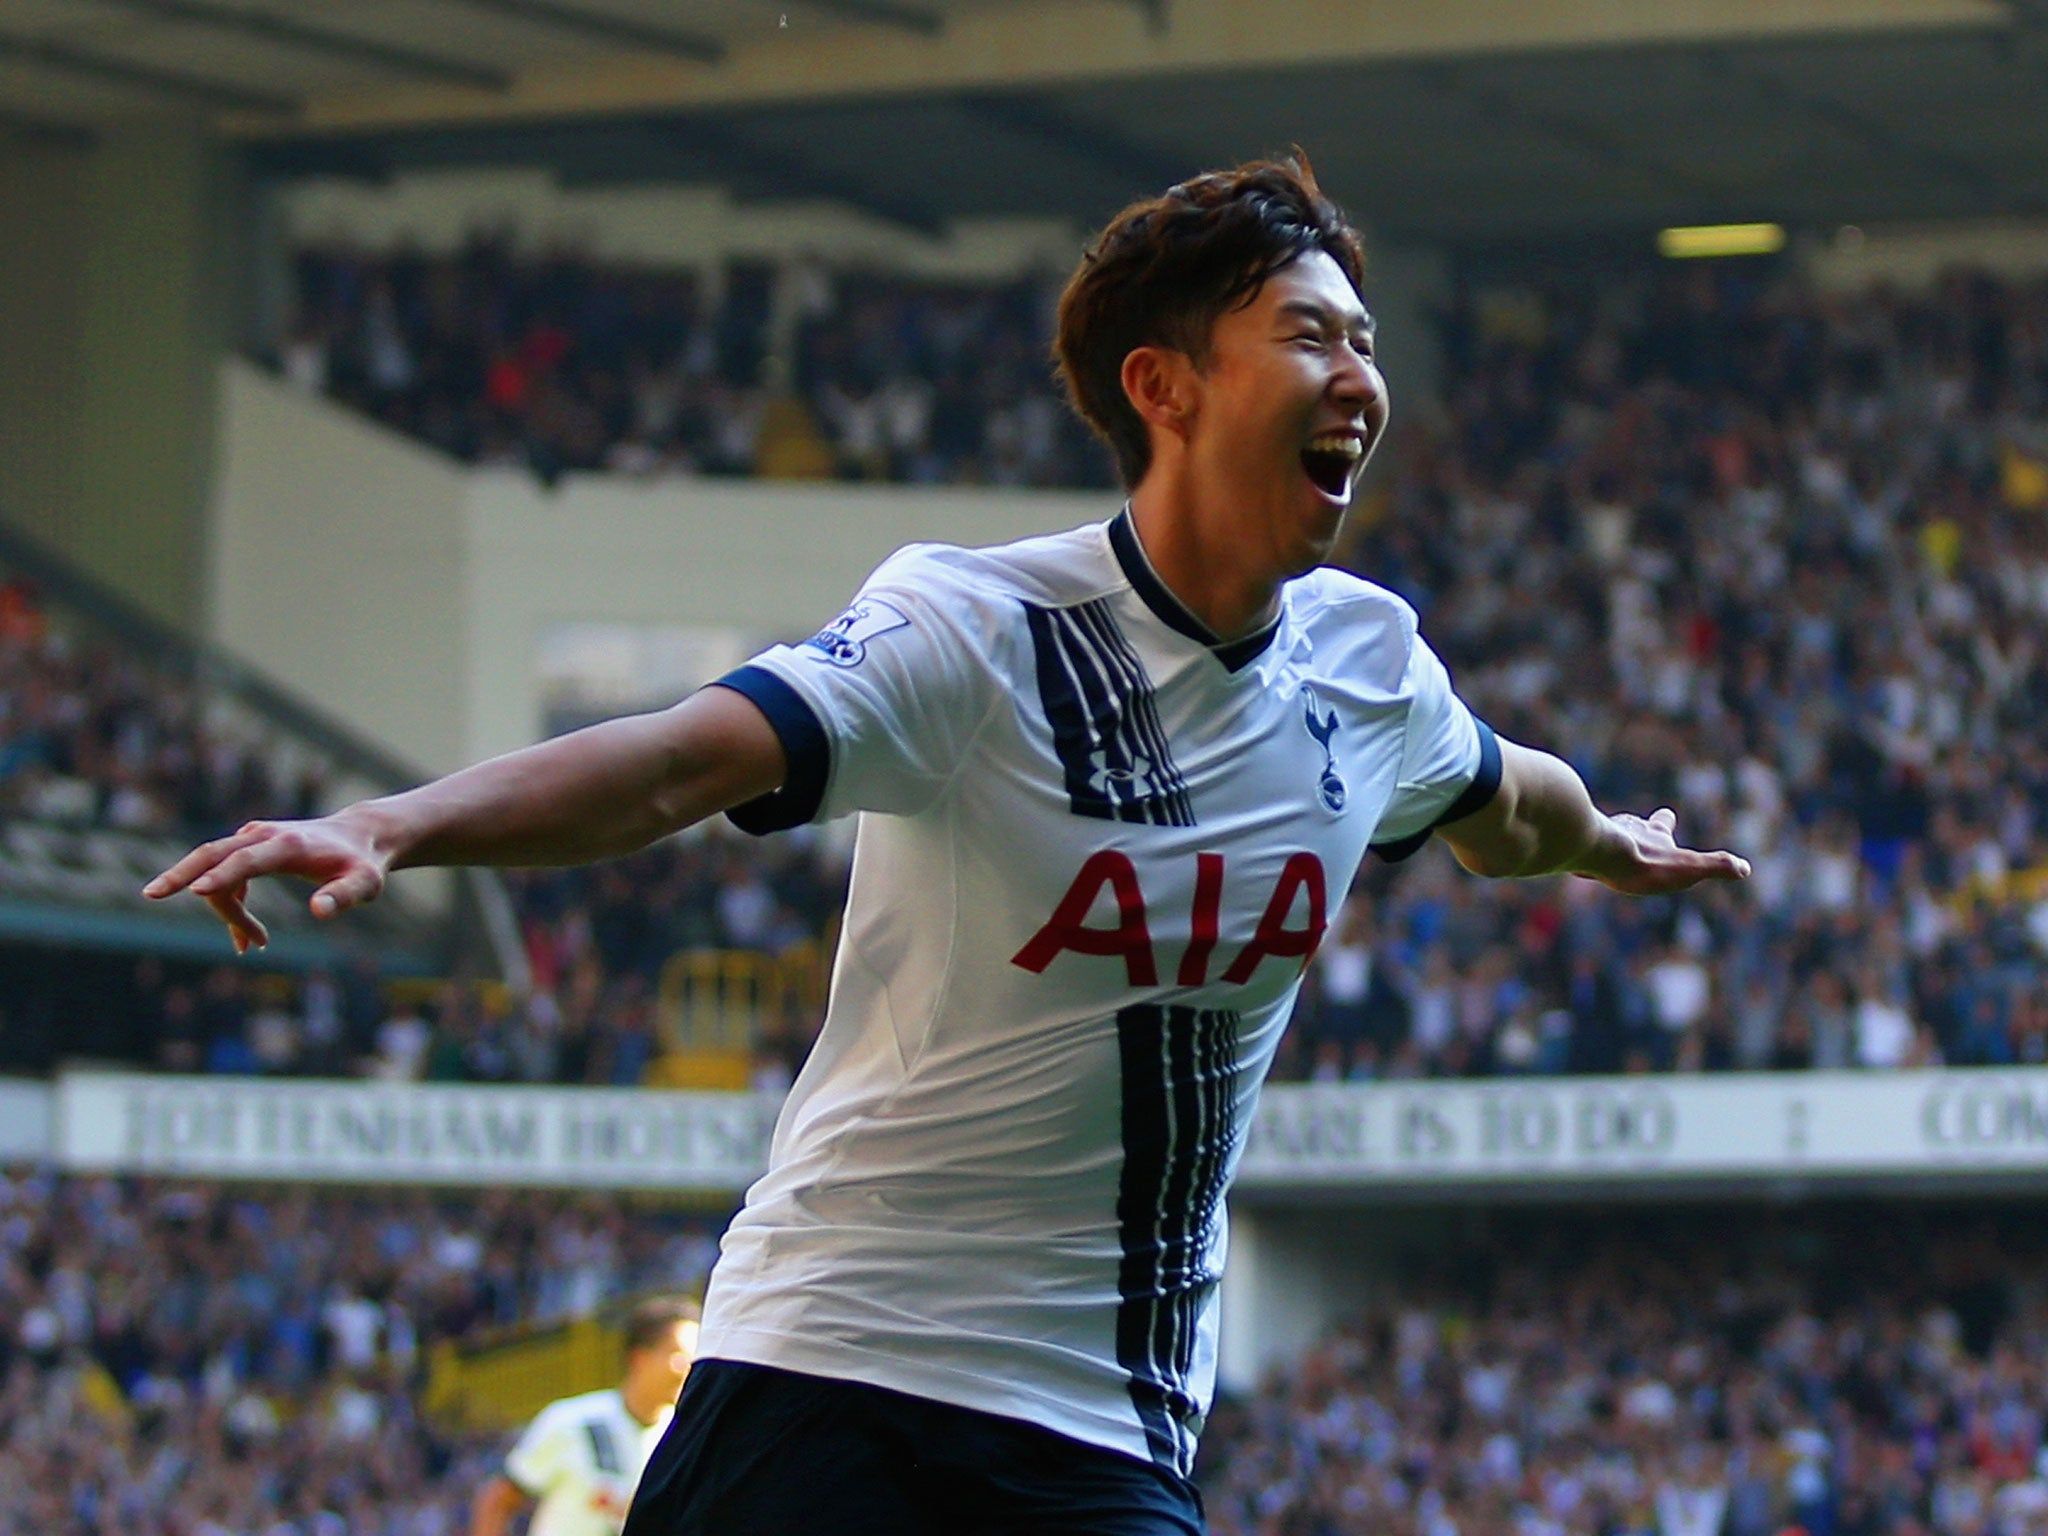 Tottenham Vs Crystal Palace Match Report: Heung Min Son Scores Premier League Debut Goal To Fire Spurs To Victory